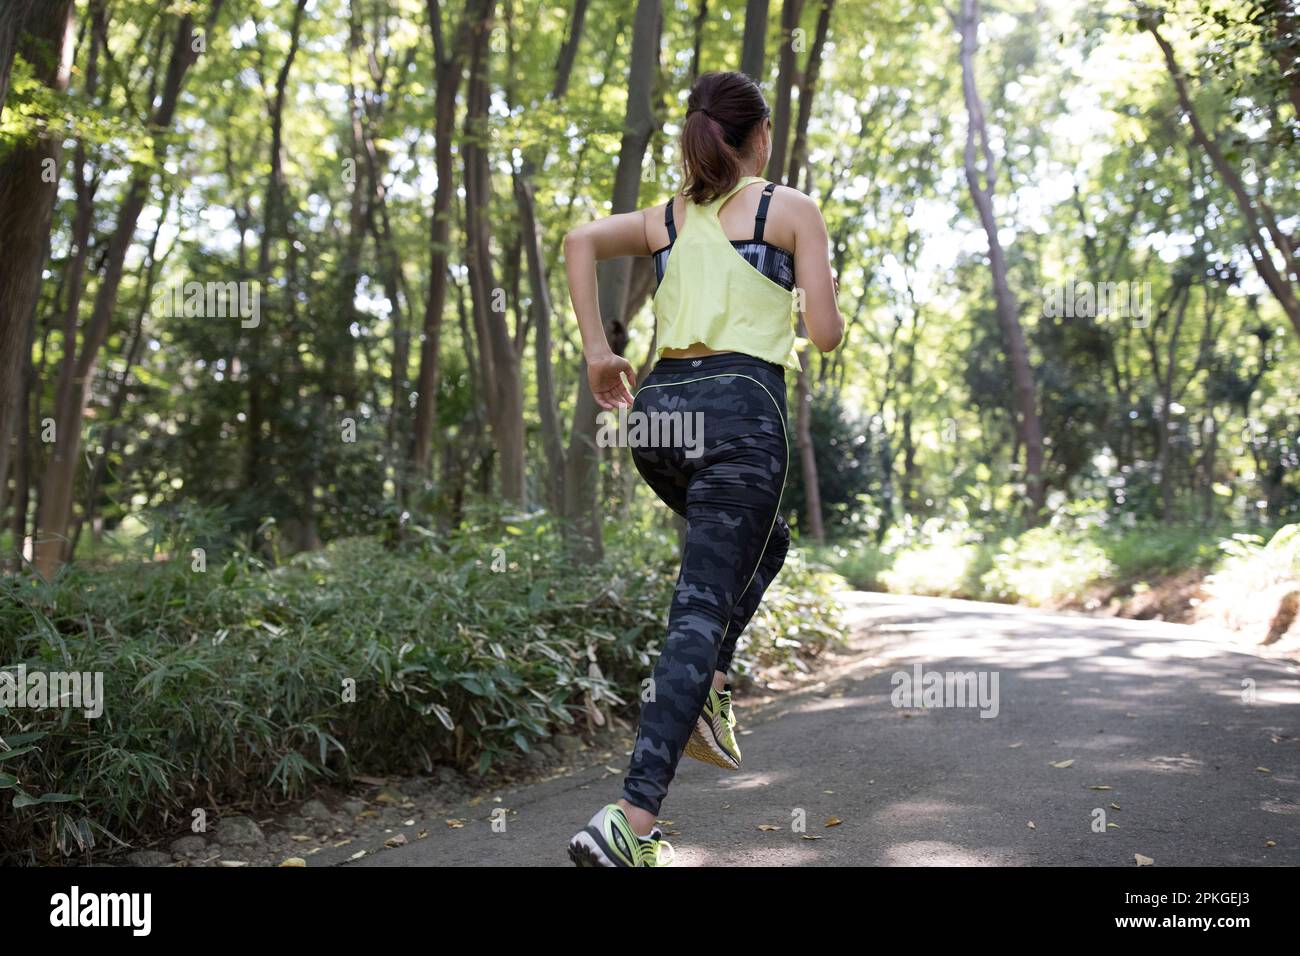 Back view of a woman jogging in a grove of trees Stock Photo